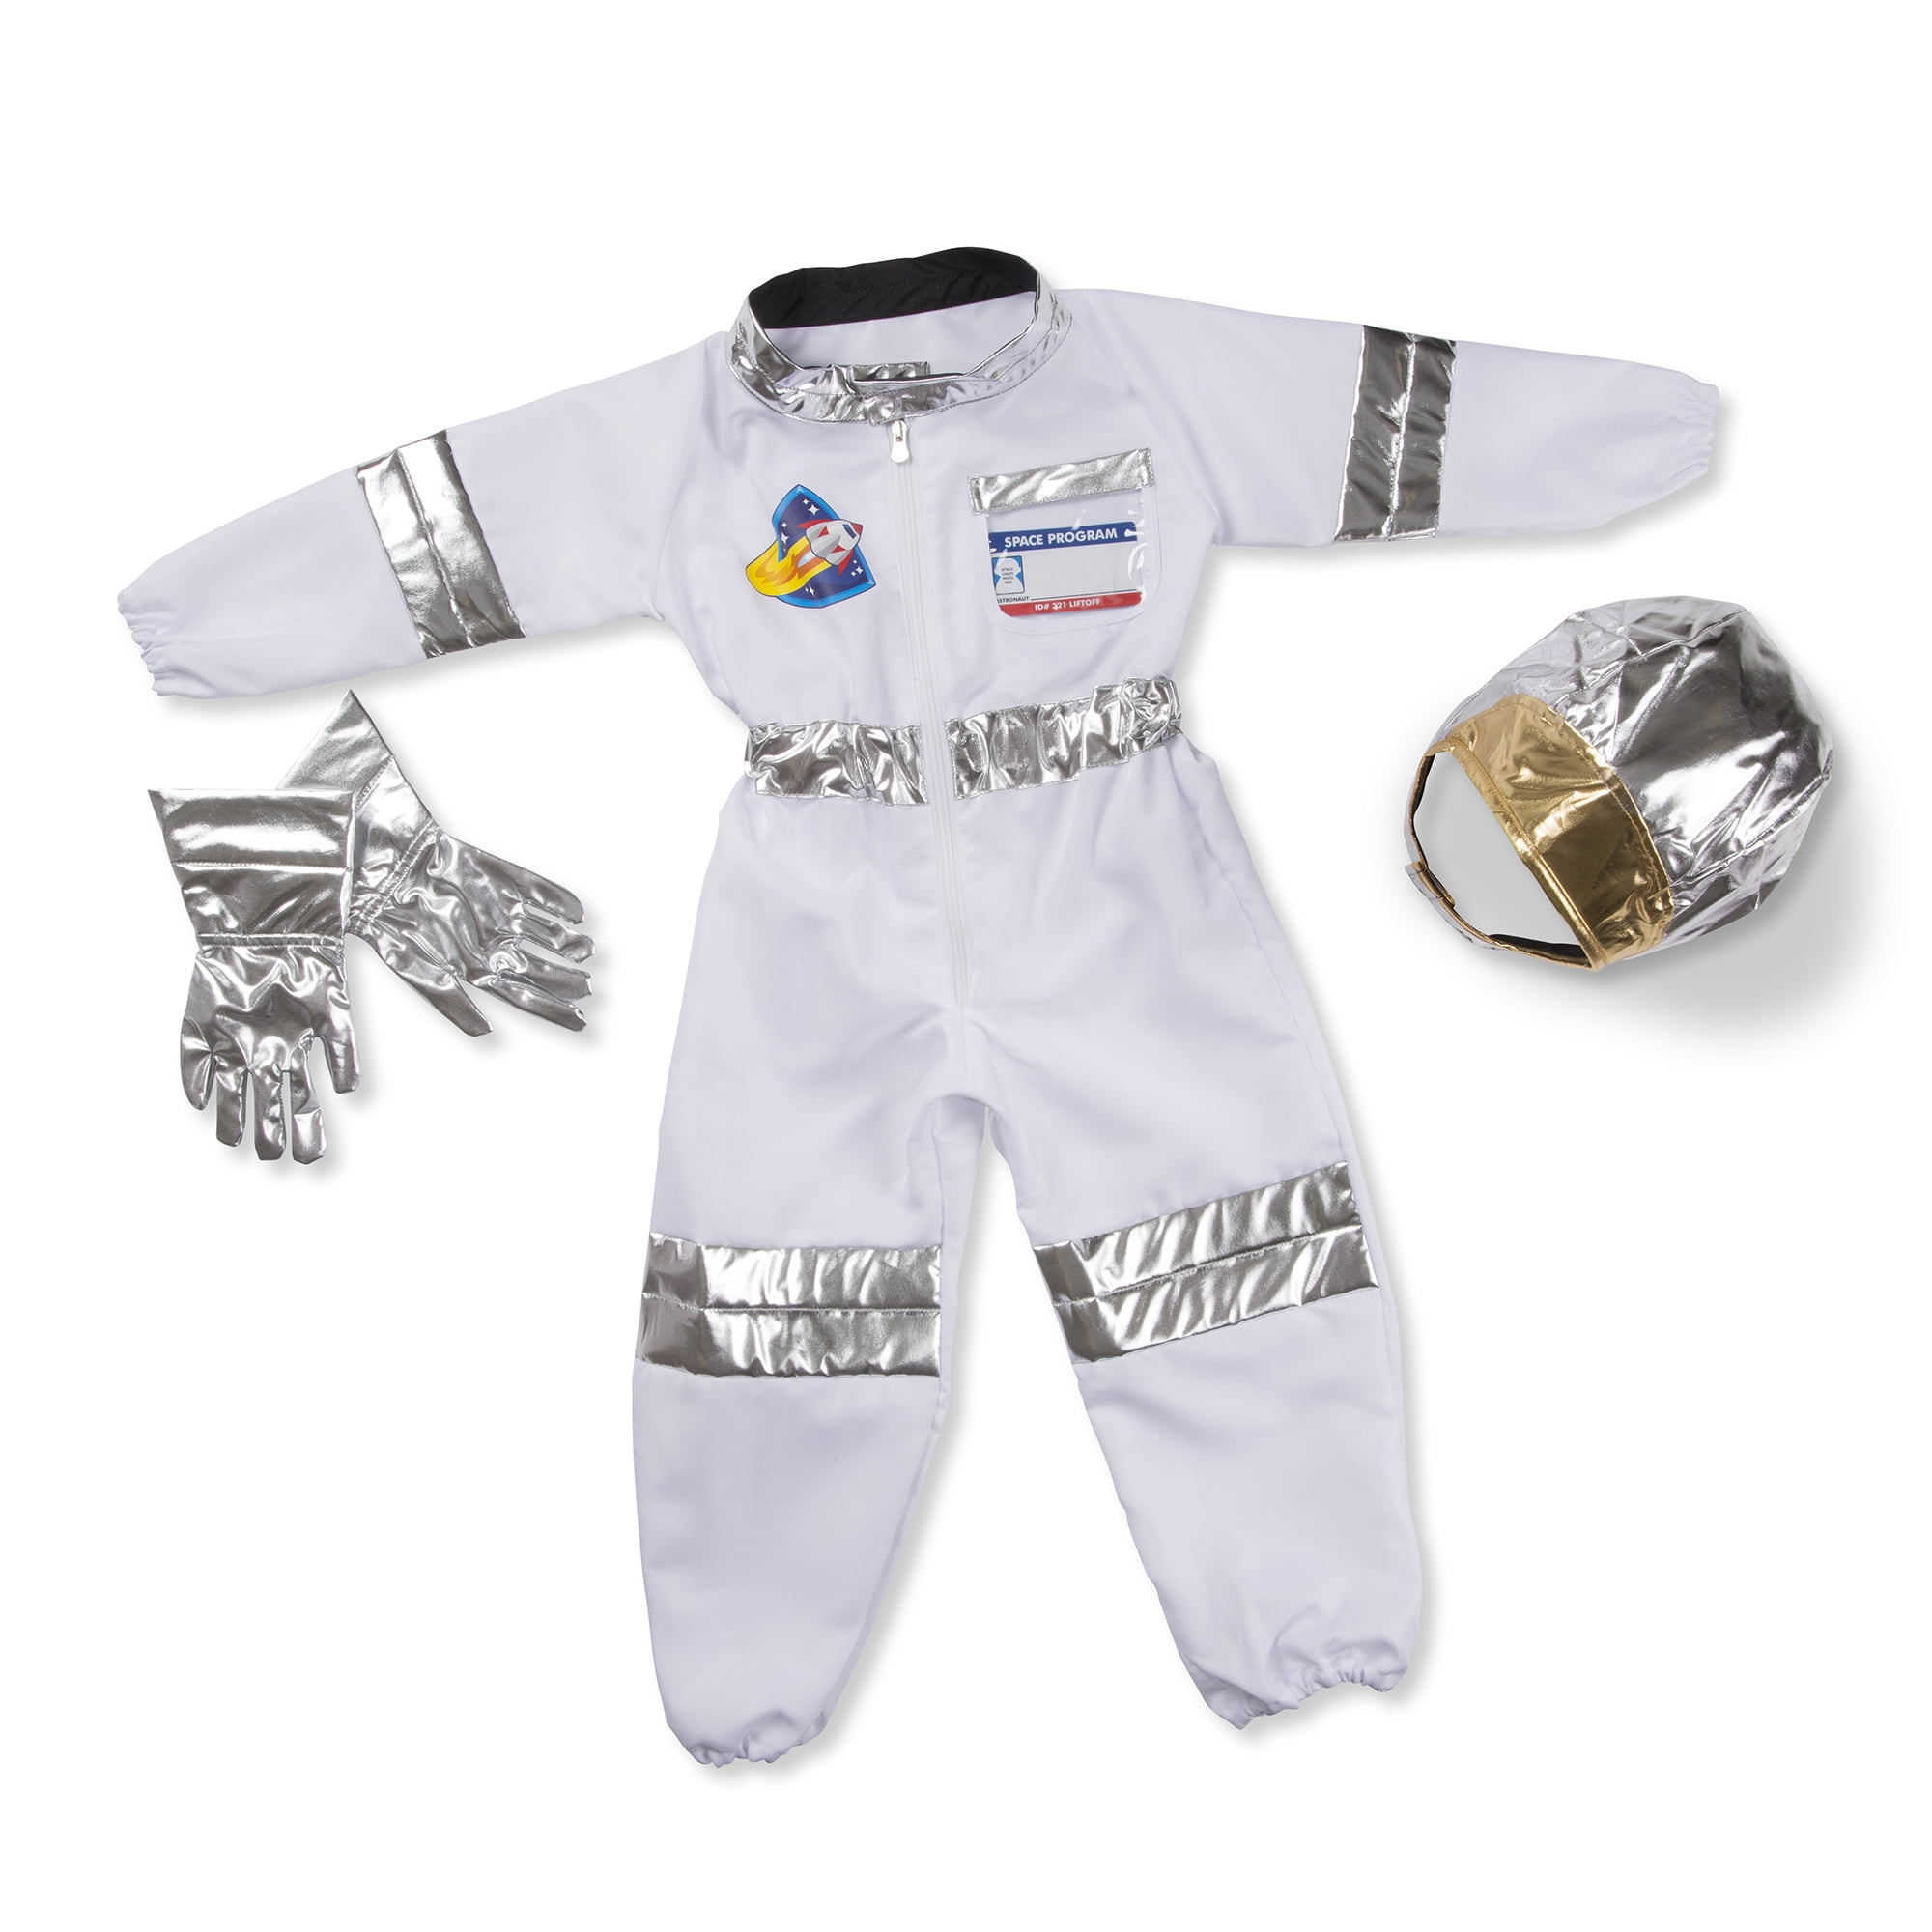 Kids Astronaut Costume Space Suit Role Play Dress Up with Movable Visor Helmet